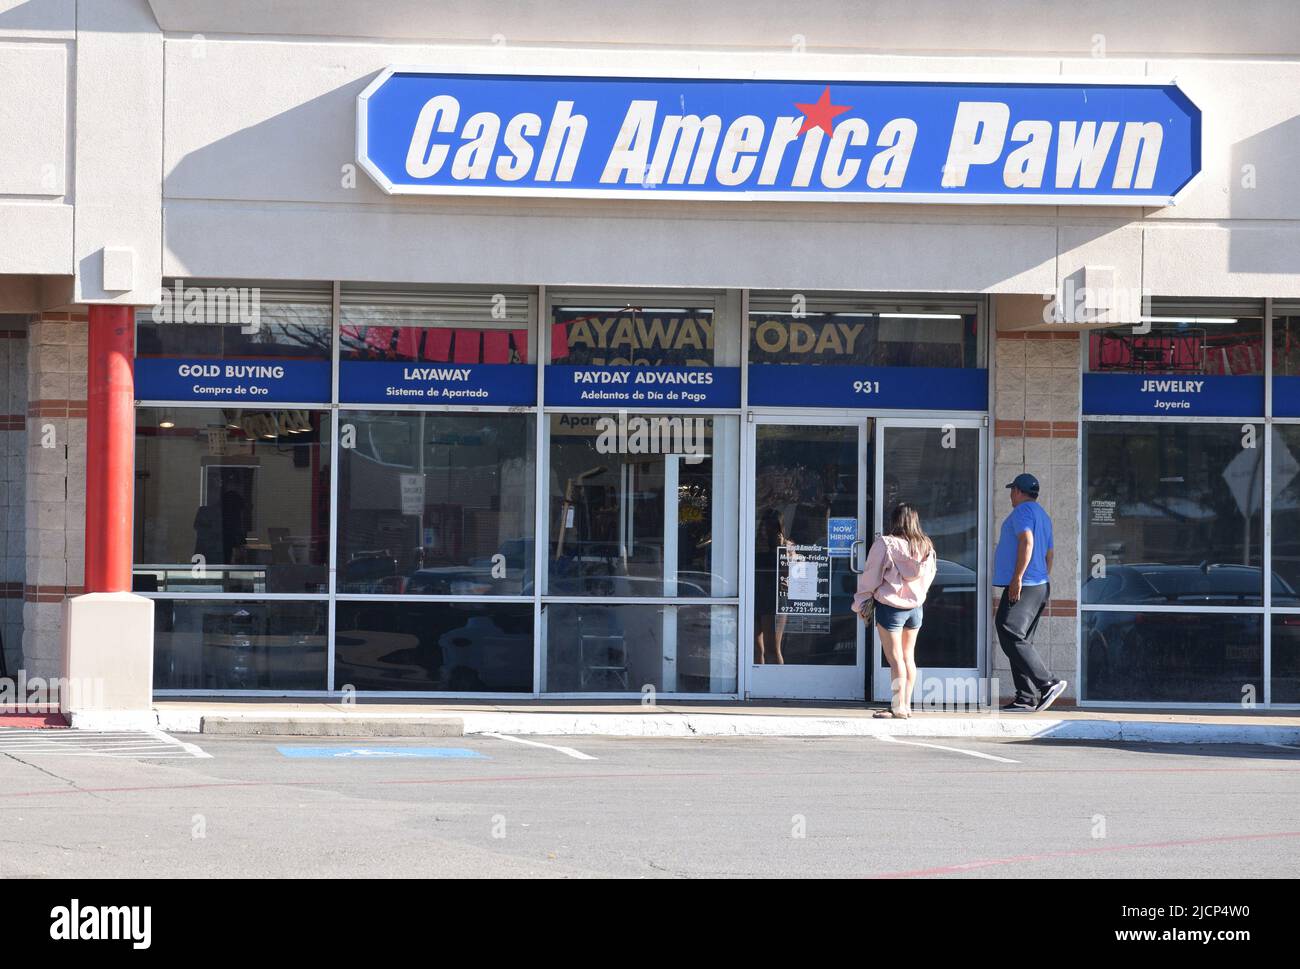 A man and a woman walking into a Cash America Pawn shop Stock Photo